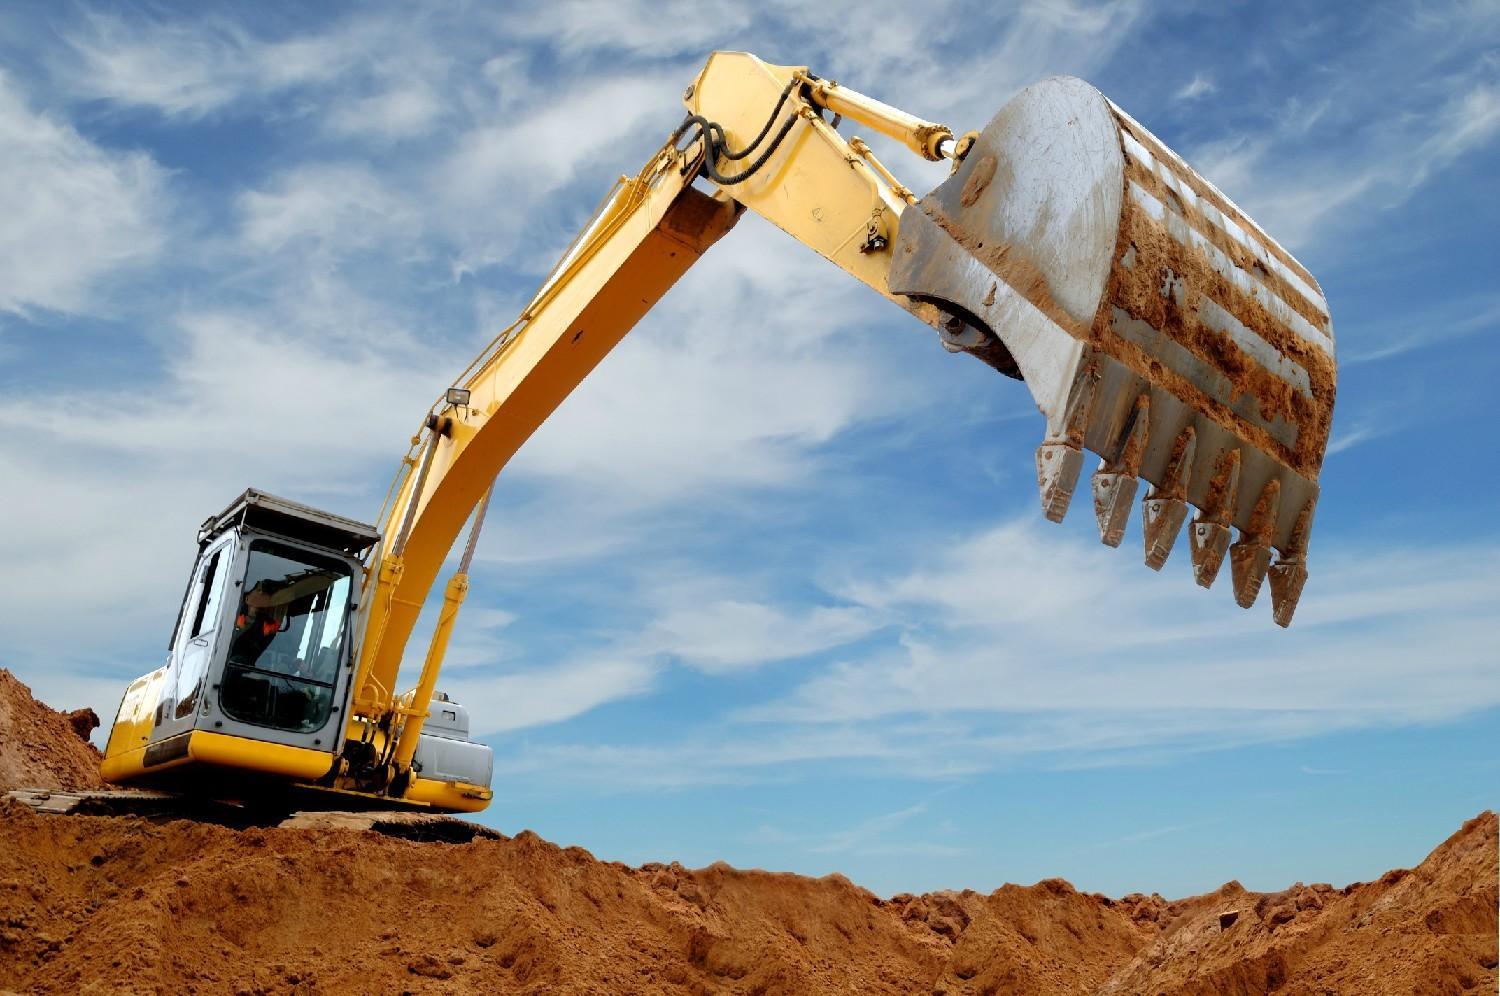 Common Mistakes To Avoid When Buying Construction Equipment